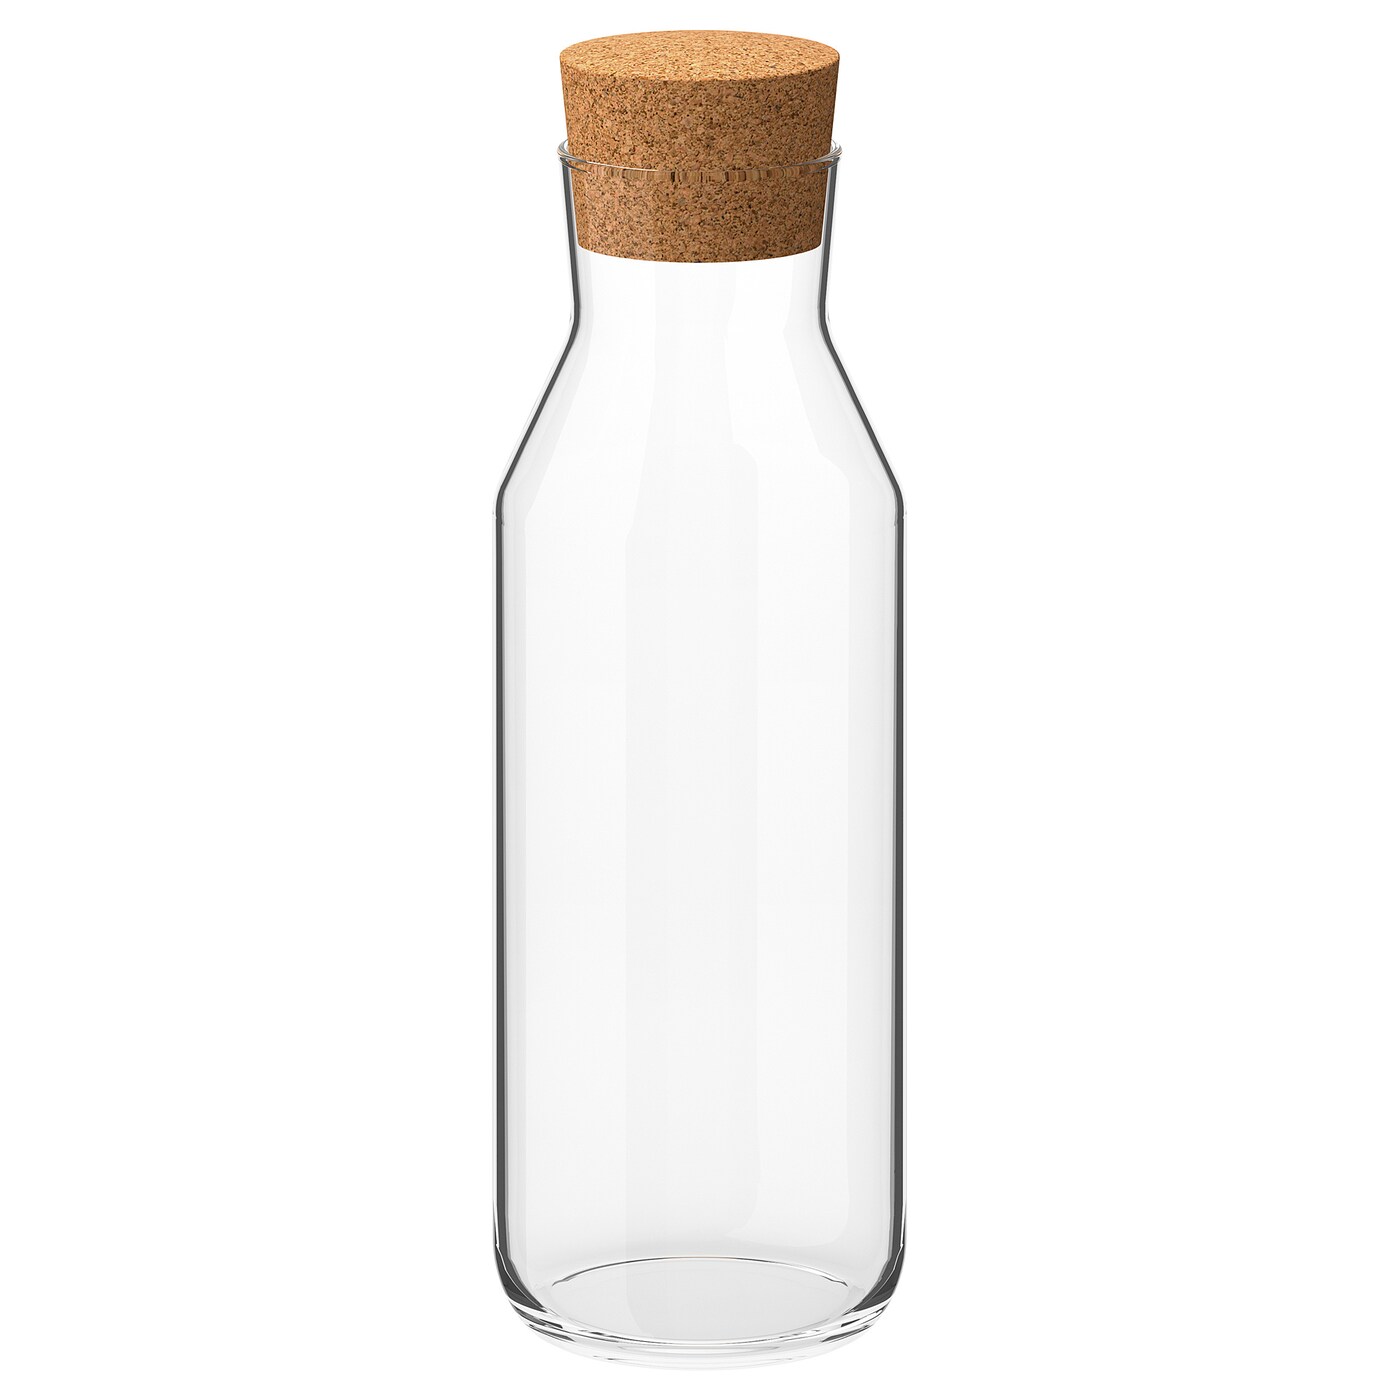 500ml Glass Cork Carafe with stopper BrunosGraphics